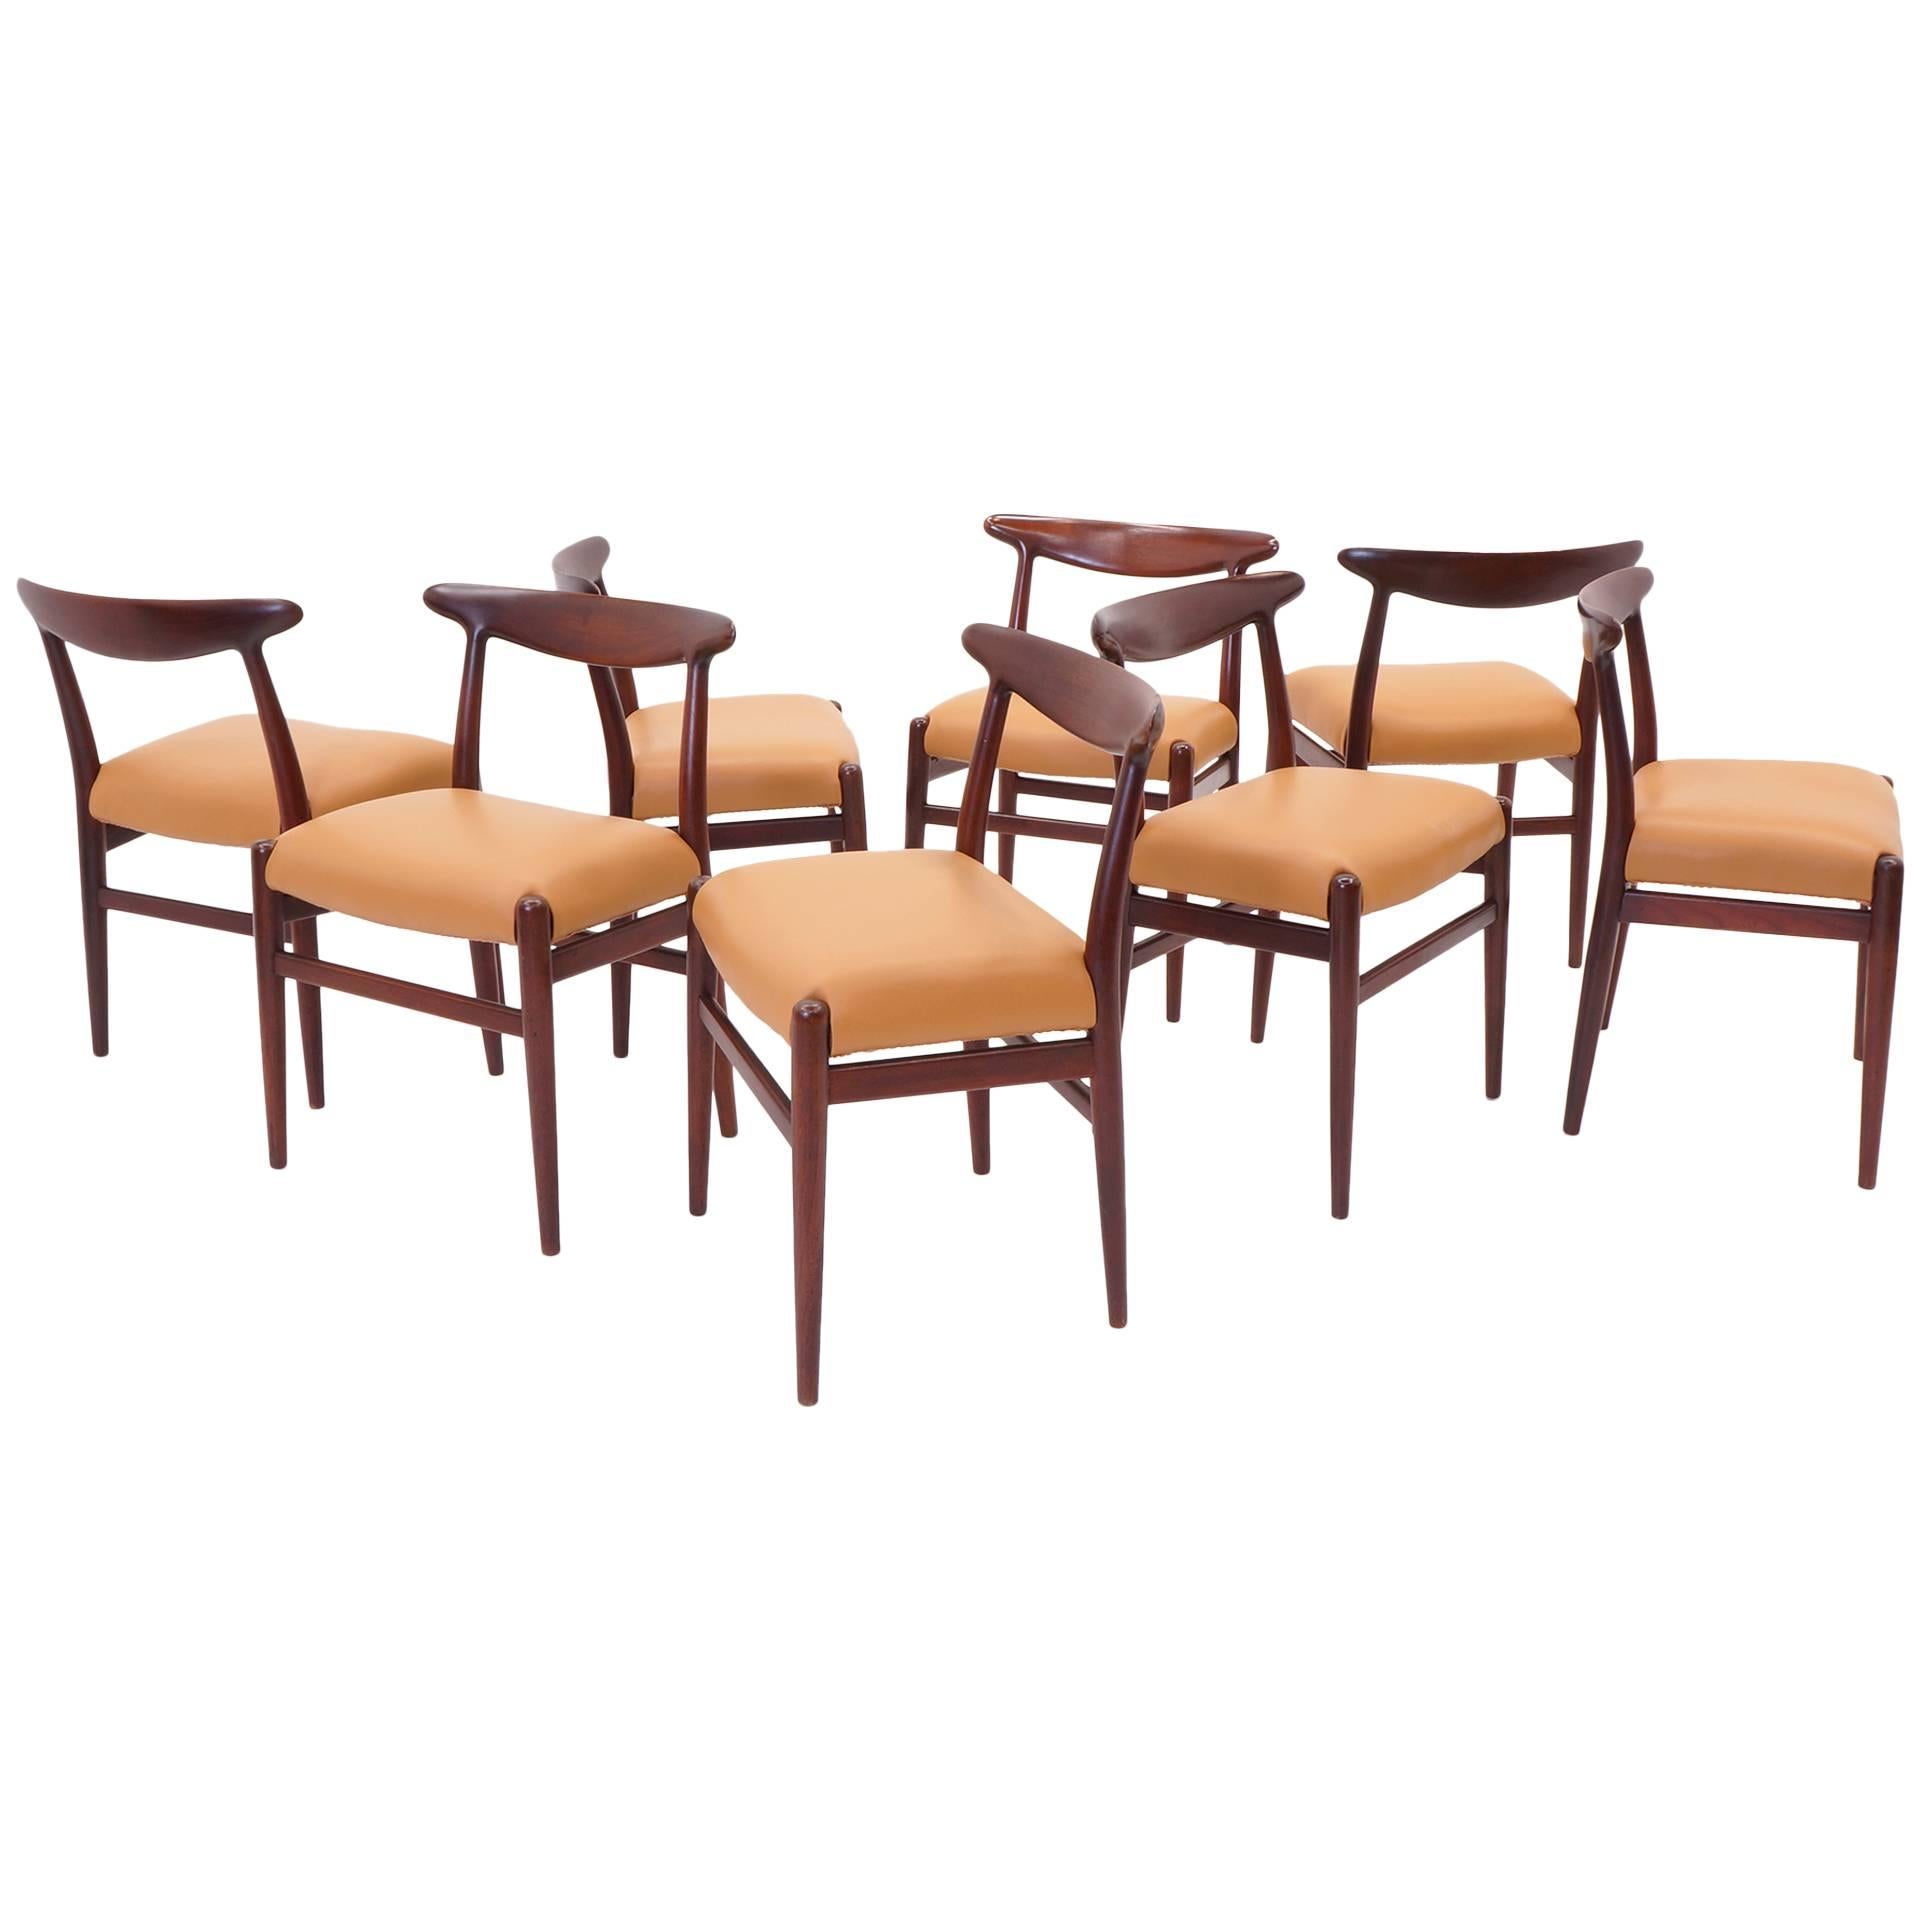 Set of Eight Teak and Leather Hans Wegner Dining Chairs